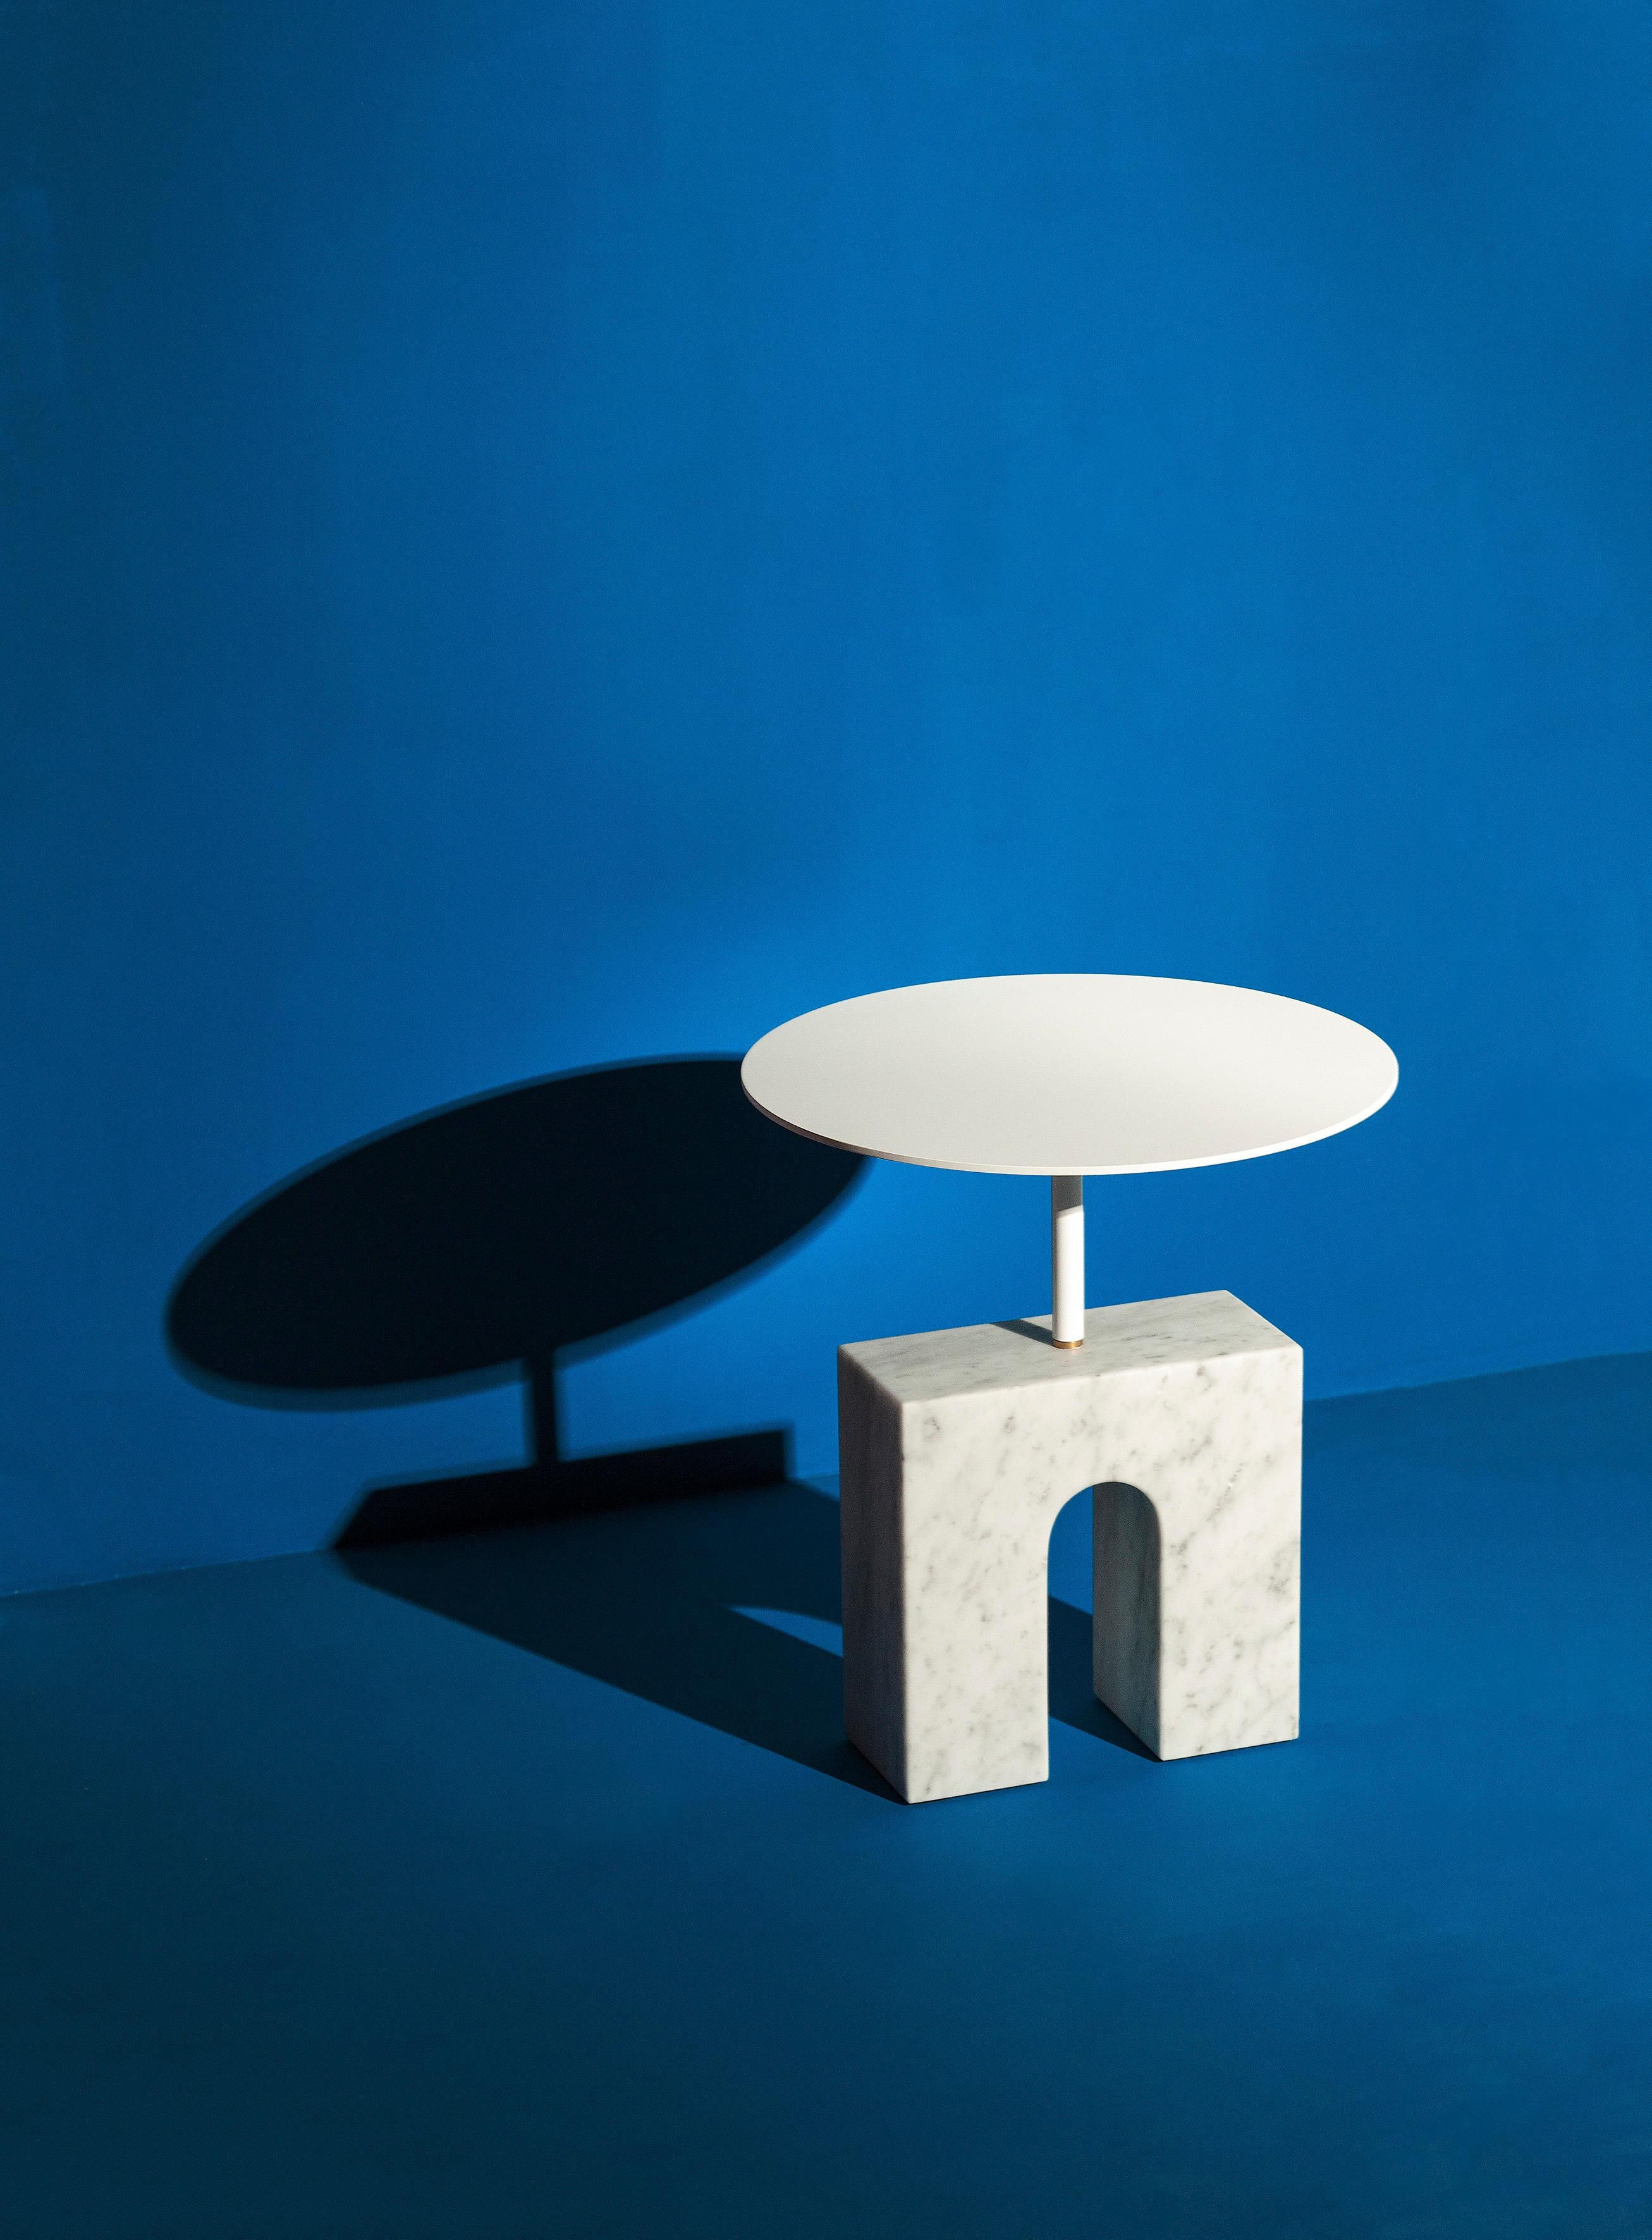 Triumph marble side table by Joseph Vila Capdevila
Materials: Carrara marble, white lacquered iron, brass
Dimensions: ø 42 x 46.5 cm
Weight: 27 kg

Luxurious mirror in two separated parts: the base, made with premium Carrara marble, and mirror,